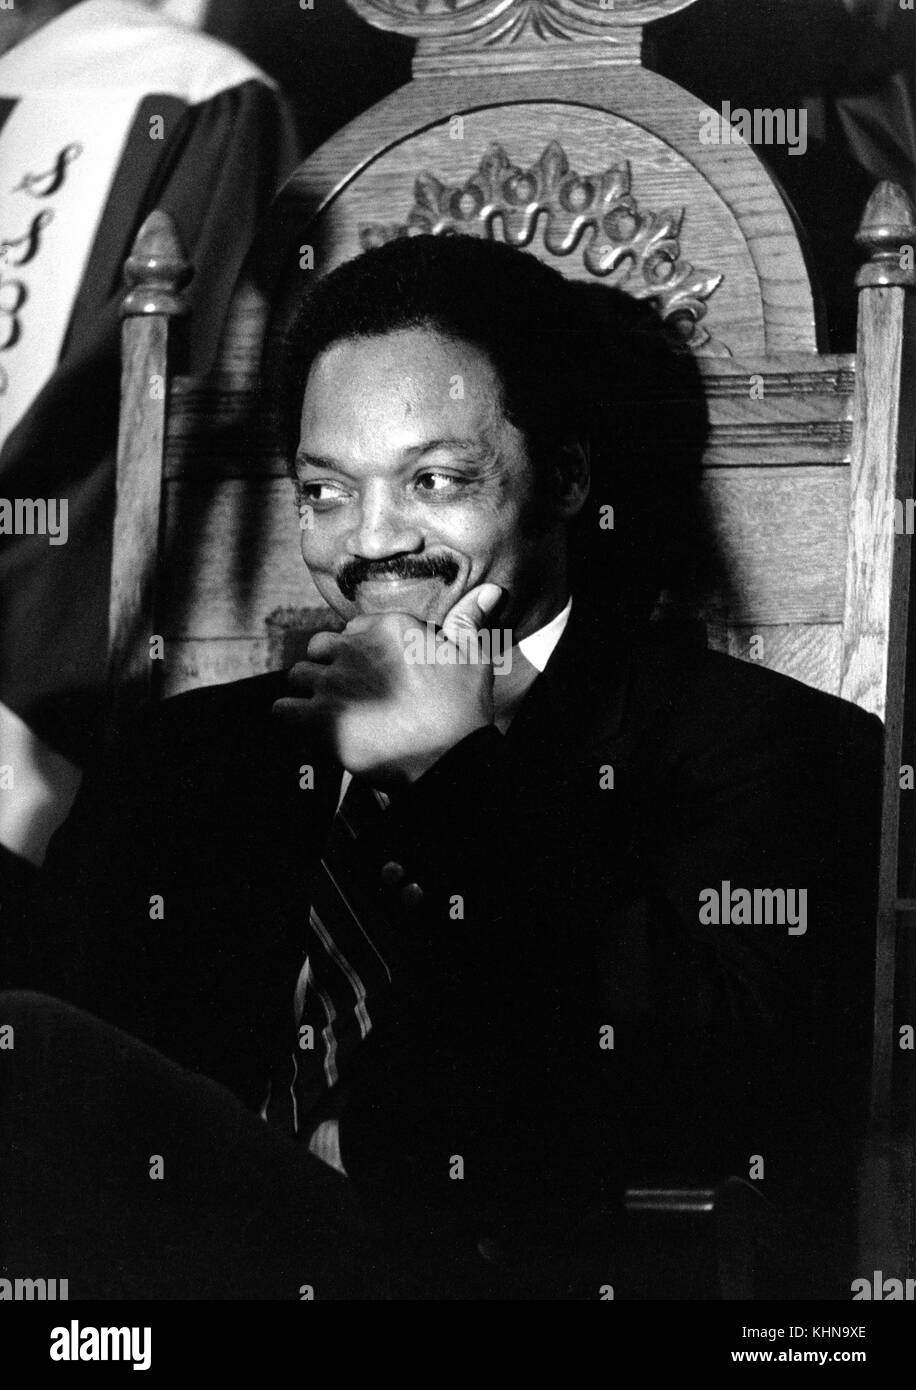 Jesse Jackson campaigns during his 1984 bid for President of the United States. On November 3, 1983, Jackson announced his campaign for President of the United States in the 1984 election,becoming the second African American to mount a nationwide campaign for president. In the Democratic Party primaries, Jackson, who had been written off by pundits as a fringe candidate with little chance at winning the nomination, surprised many when he took third place behind Senator Gary Hart and former Vice President Walter Mondale, who eventually won the nomination. Stock Photo